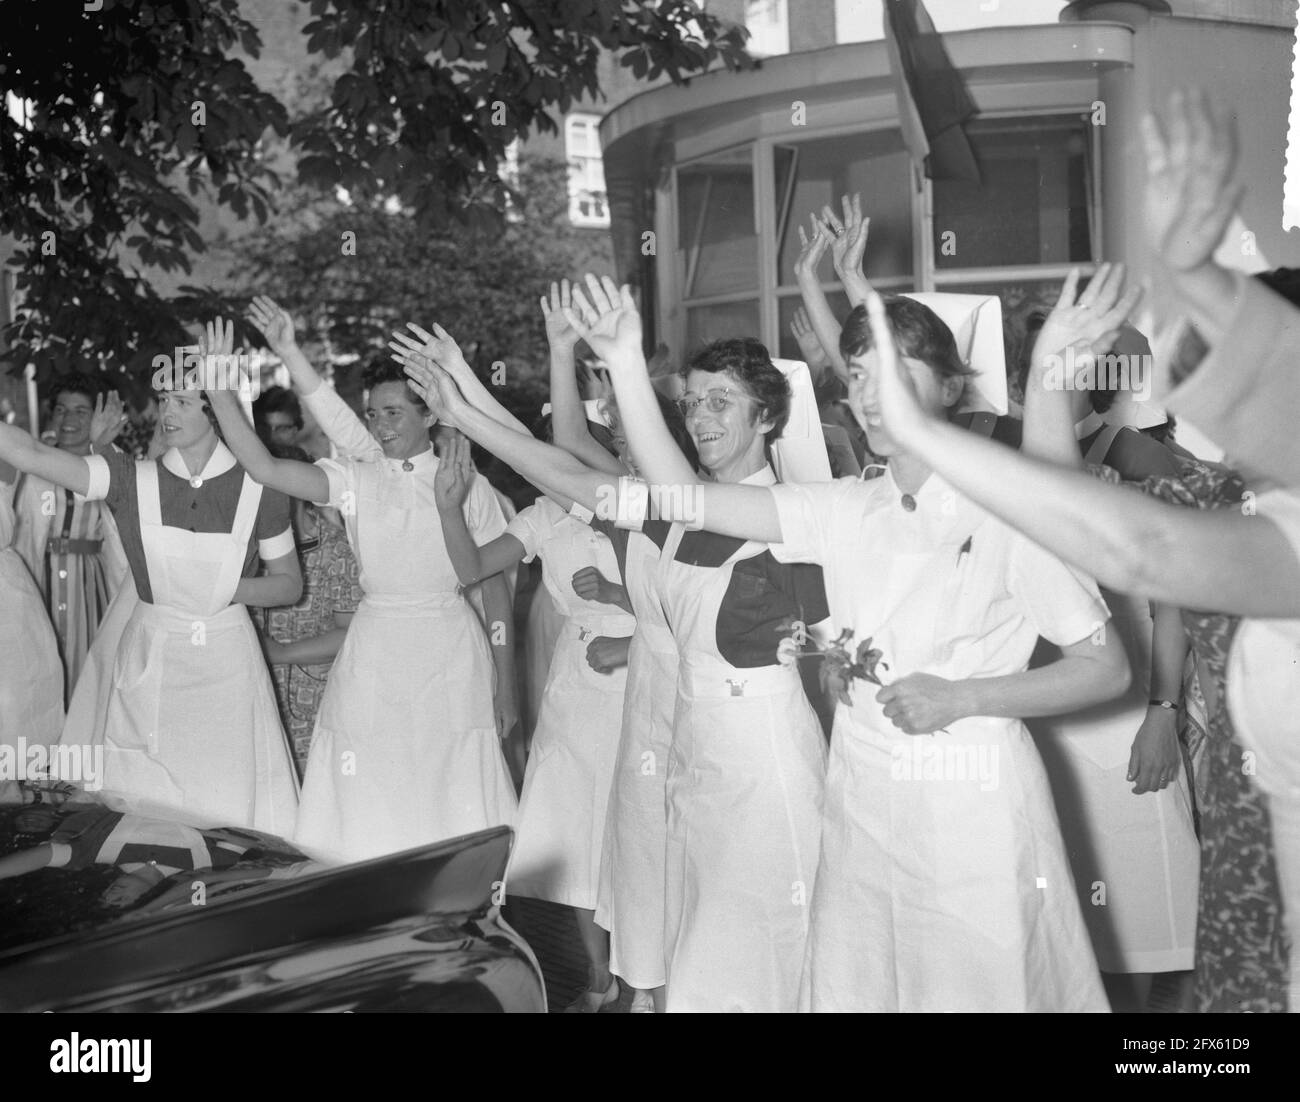 H. M. the Queen visits the Ant. van Leeuwenhoek House Nurses wave goodbye, June 20, 1961, REMEMBRANCE, NURSES, WOWS, The Netherlands, 20th century press agency photo, news to remember, documentary, historic photography 1945-1990, visual stories, human history of the Twentieth Century, capturing moments in time Stock Photo